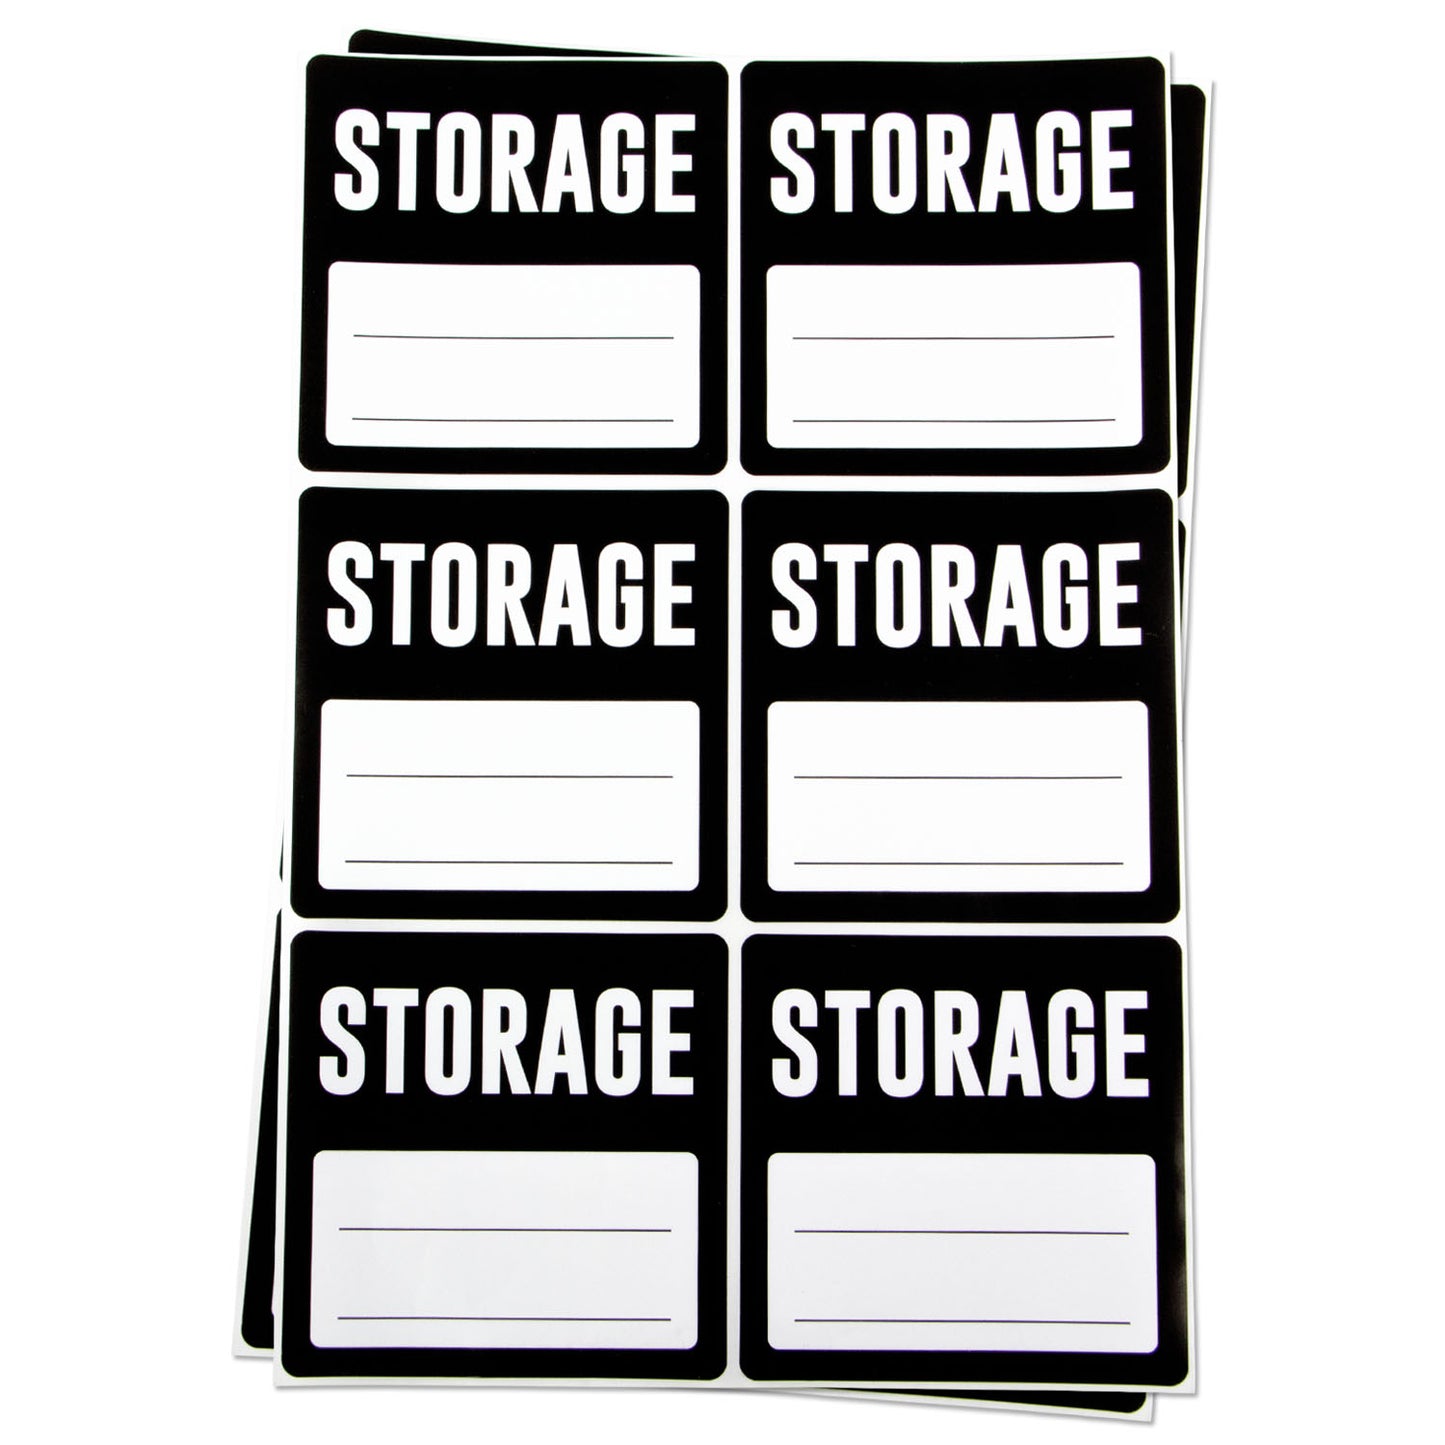 3 x 3 inch | Moving & Packing: Storage Stickers